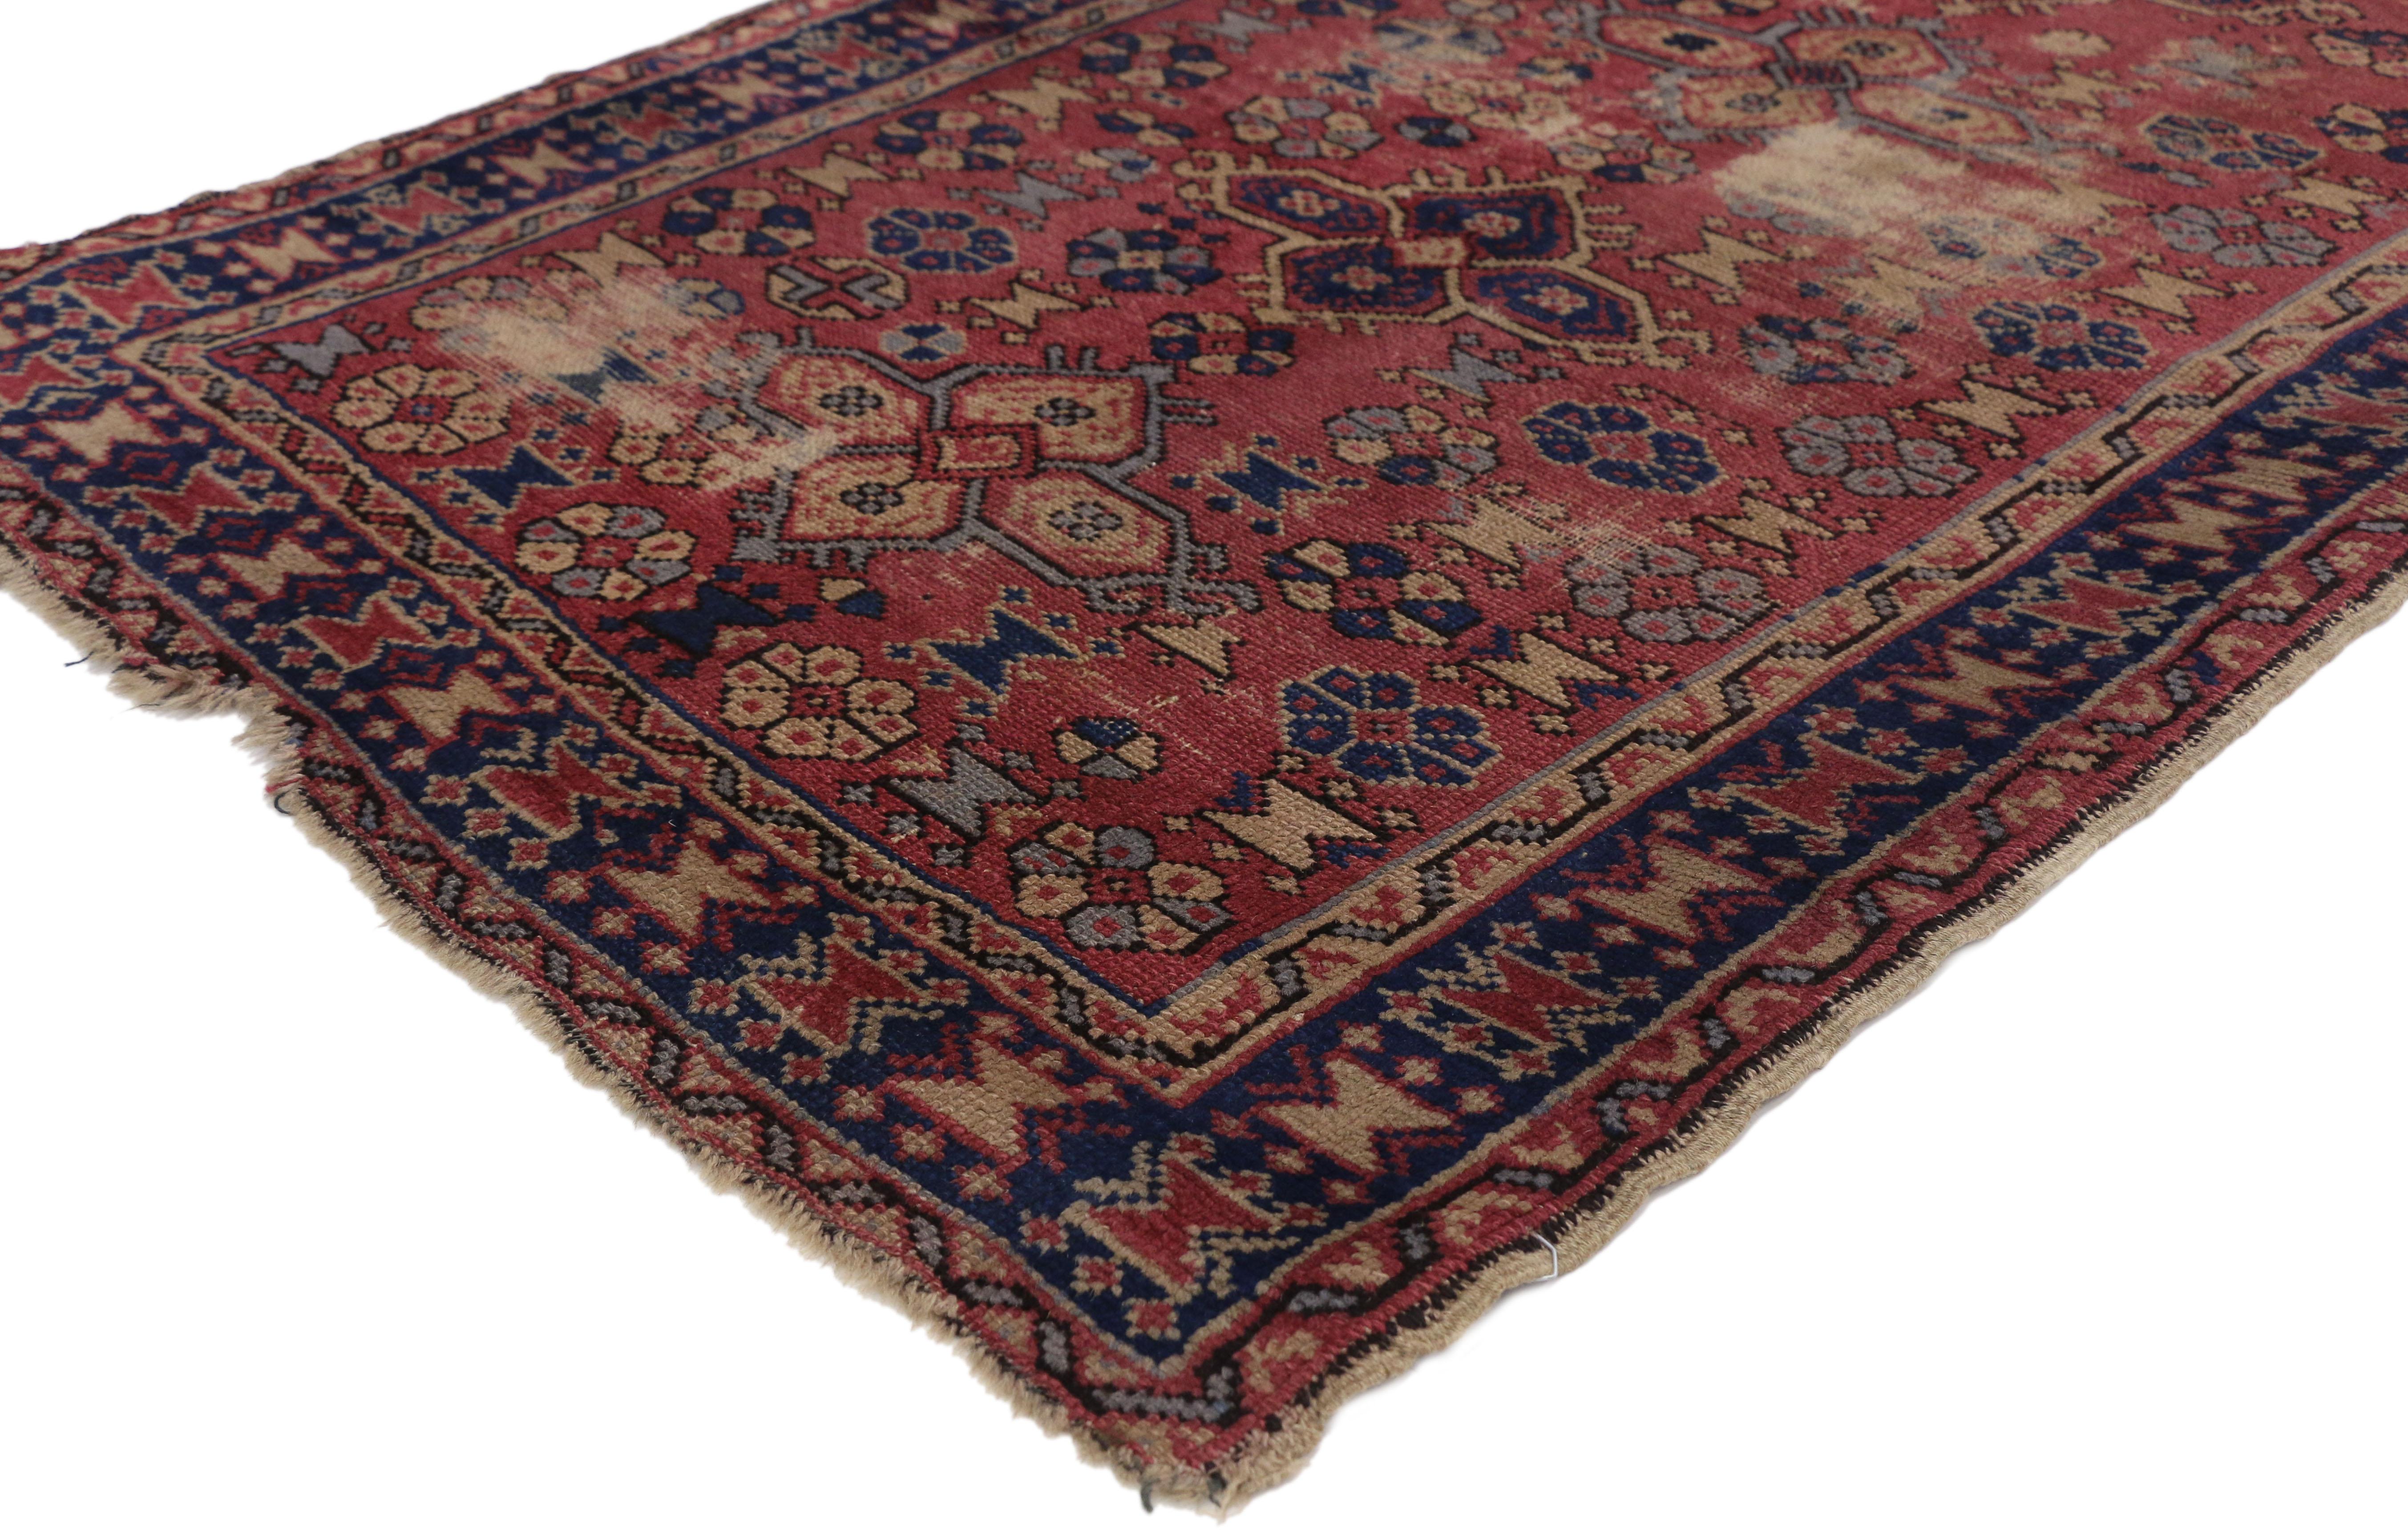 71057, distressed antique Turkish Sparta rug with Industrial style. This hand knotted wool distressed antique Turkish Sparta rug features an all-over pattern composed of four petal amulets with latch-hook edges, roundel rosettes, and head hand